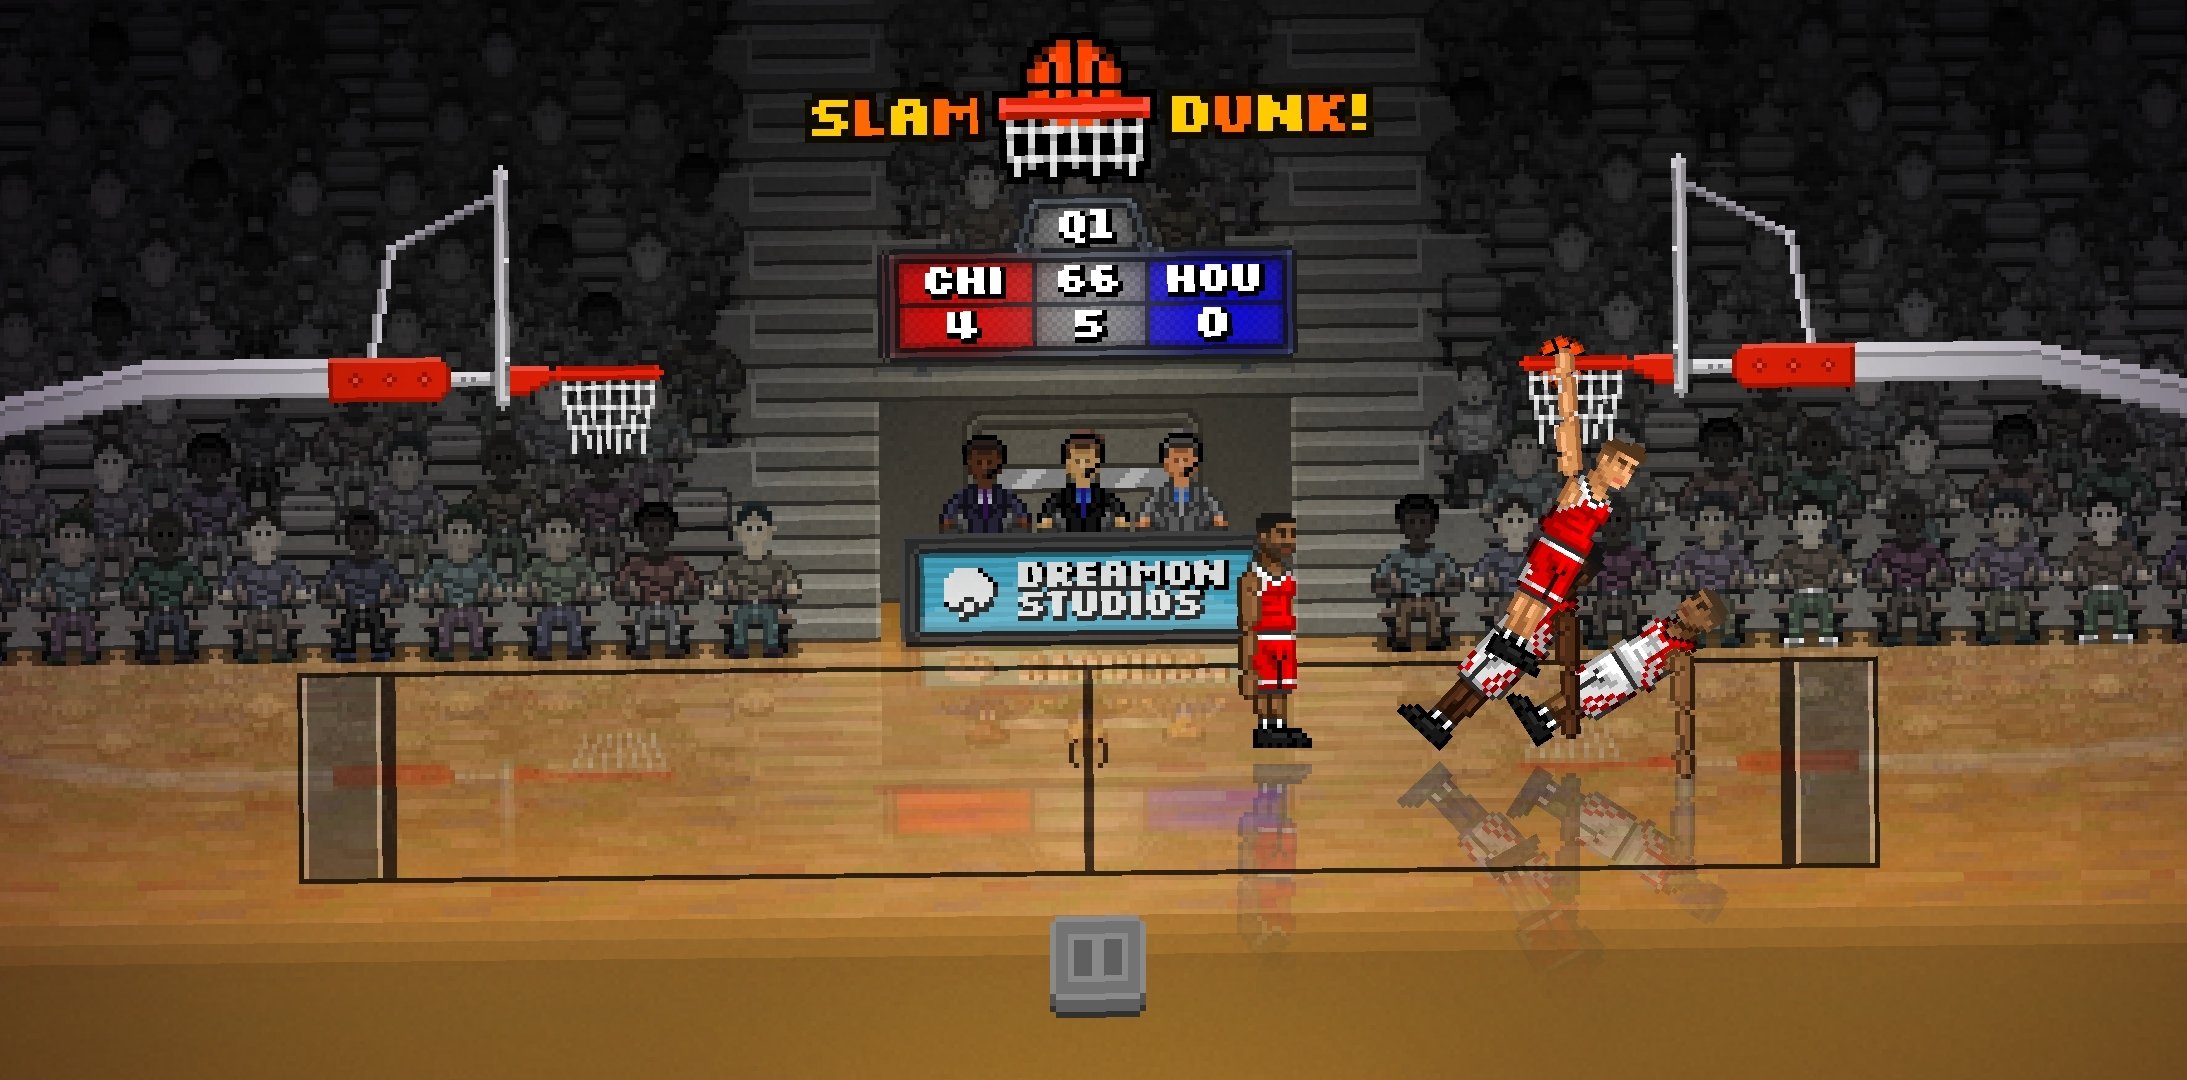 Bouncy Basketball 3.2 - Download for Android APK Free